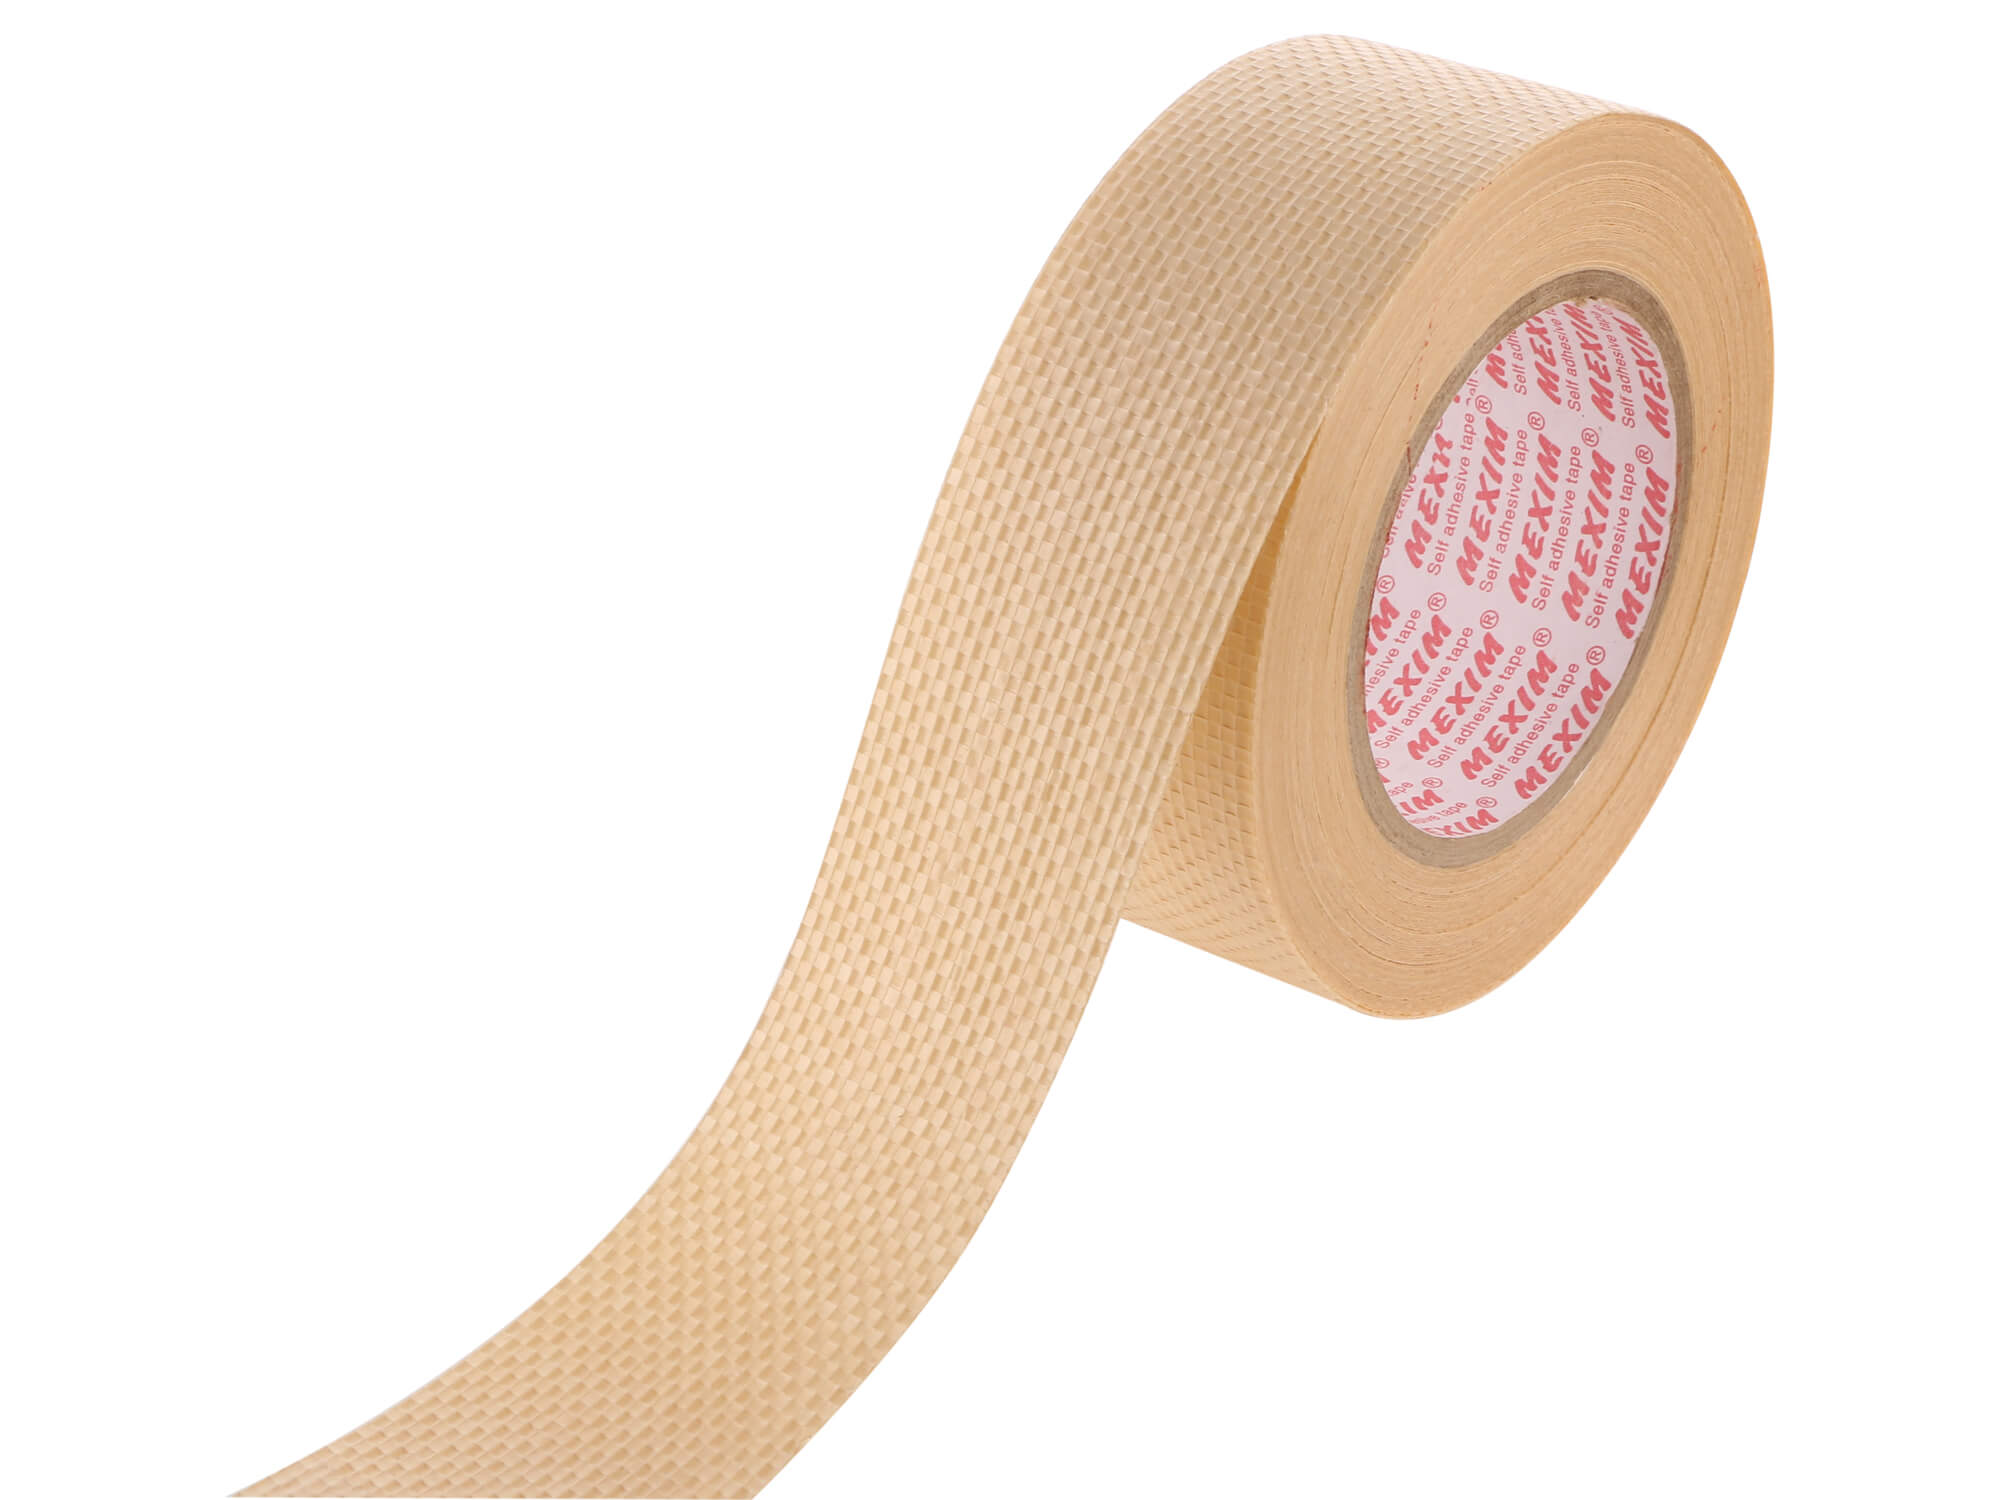 Woven HDPE Fabric Tapes